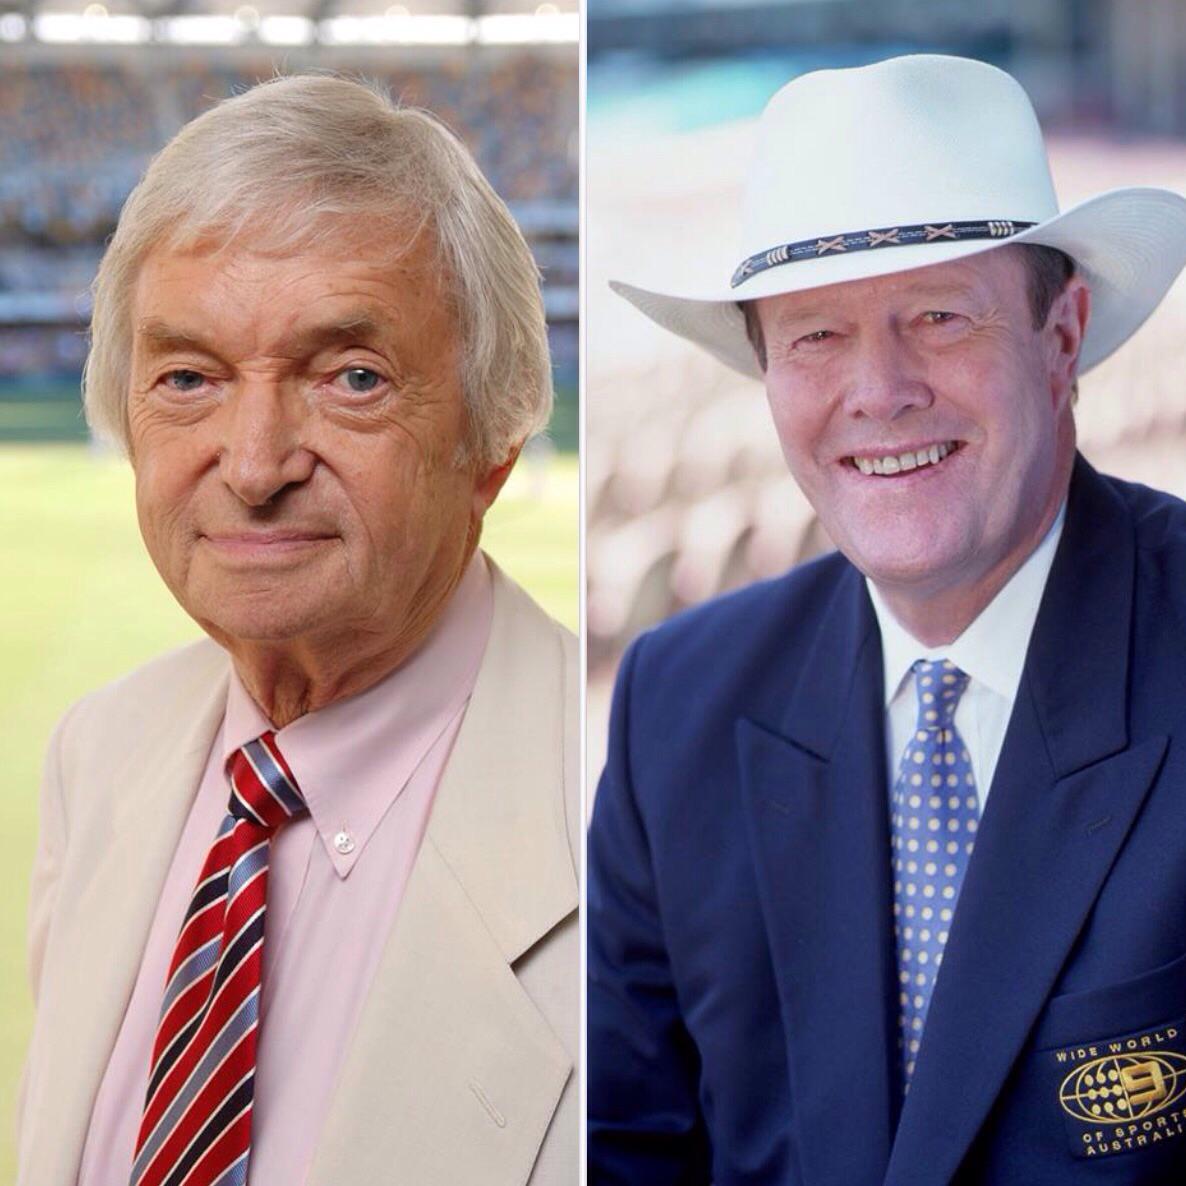 Happy Birthday to both Richie Benaud and Tony Grieg. Great memories, what a \marvellous\ day. 